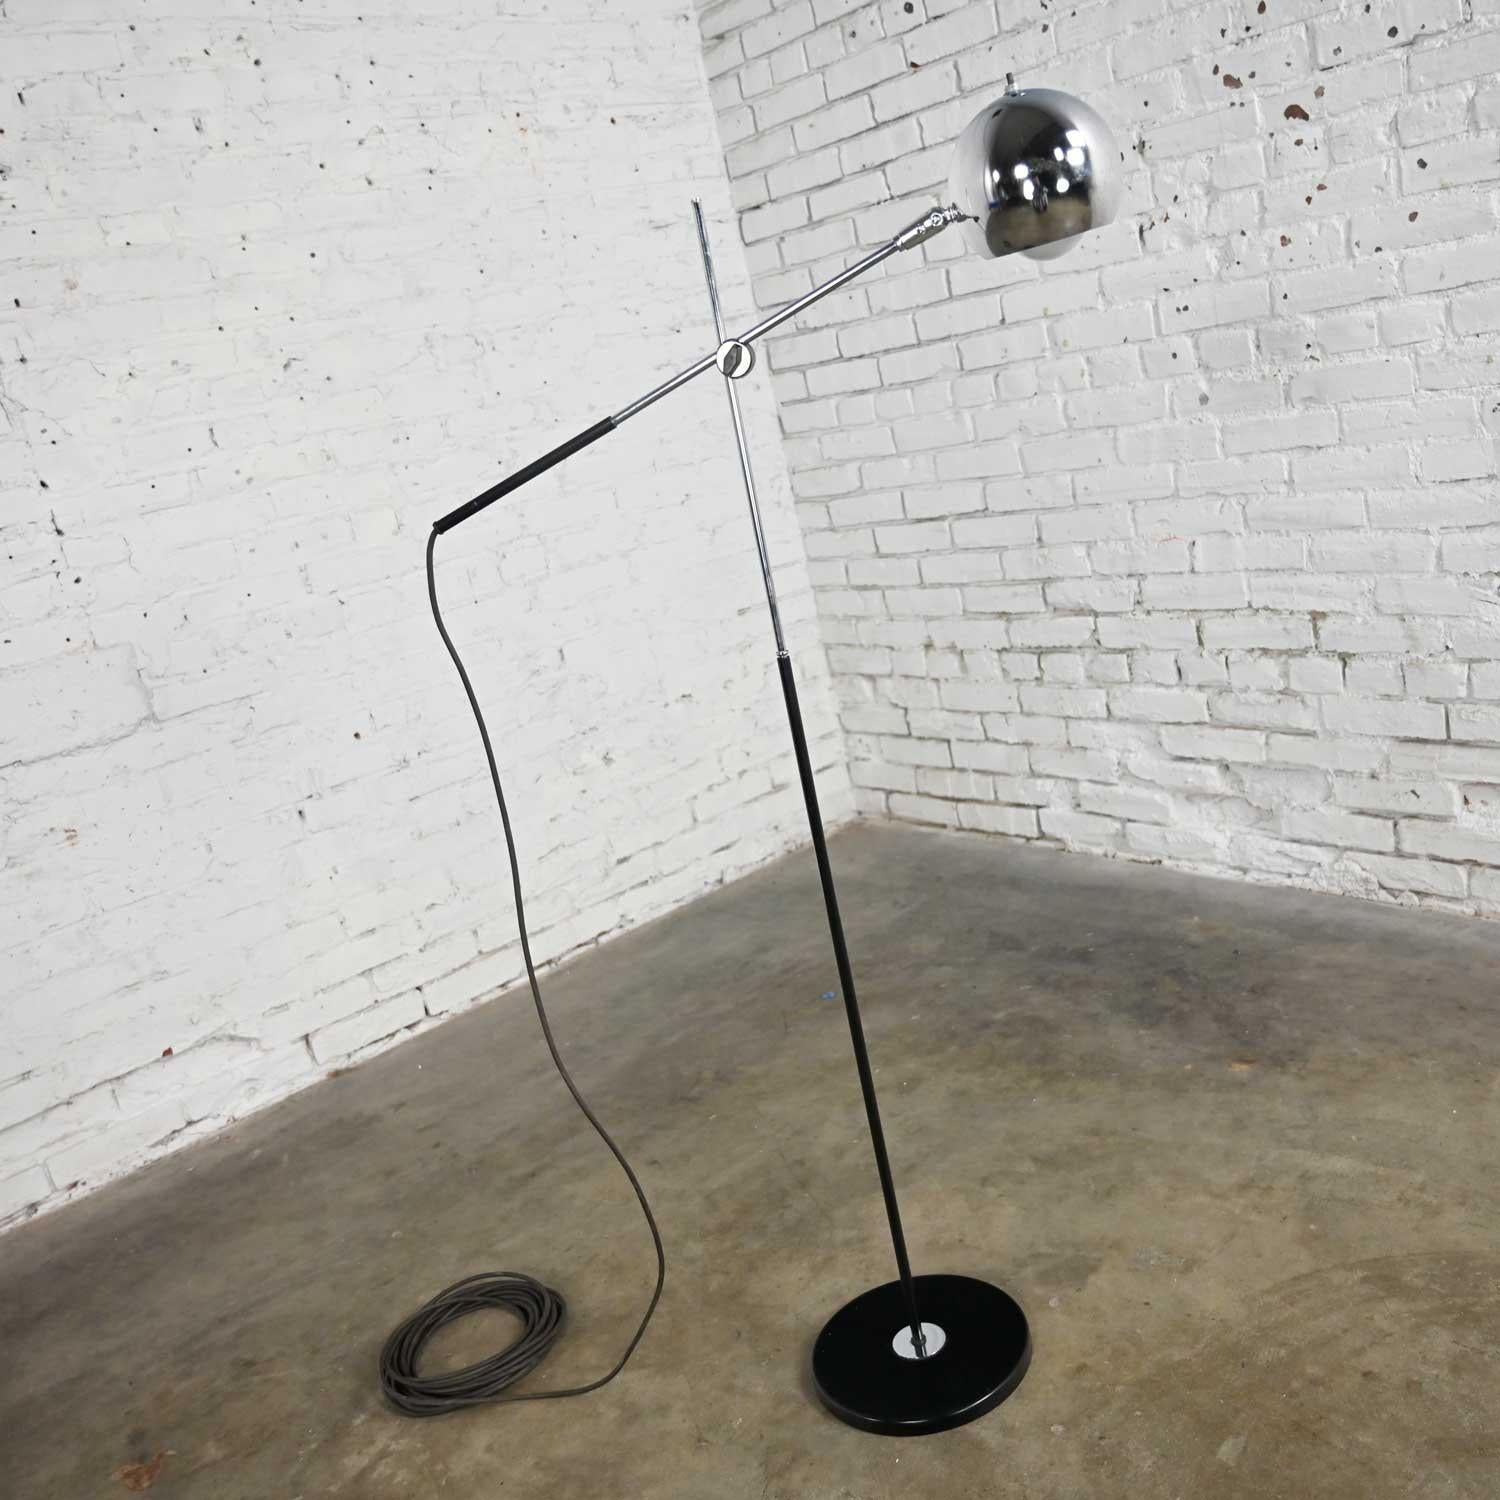 Wonderful MCM or mid-century modern orbital chrome ball adjustable floor lamp attributed to the “Eyeball” floor lamp by Robert Sonneman. Beautiful condition, keeping in mind that this is vintage and not new so will have signs of use and wear. Please